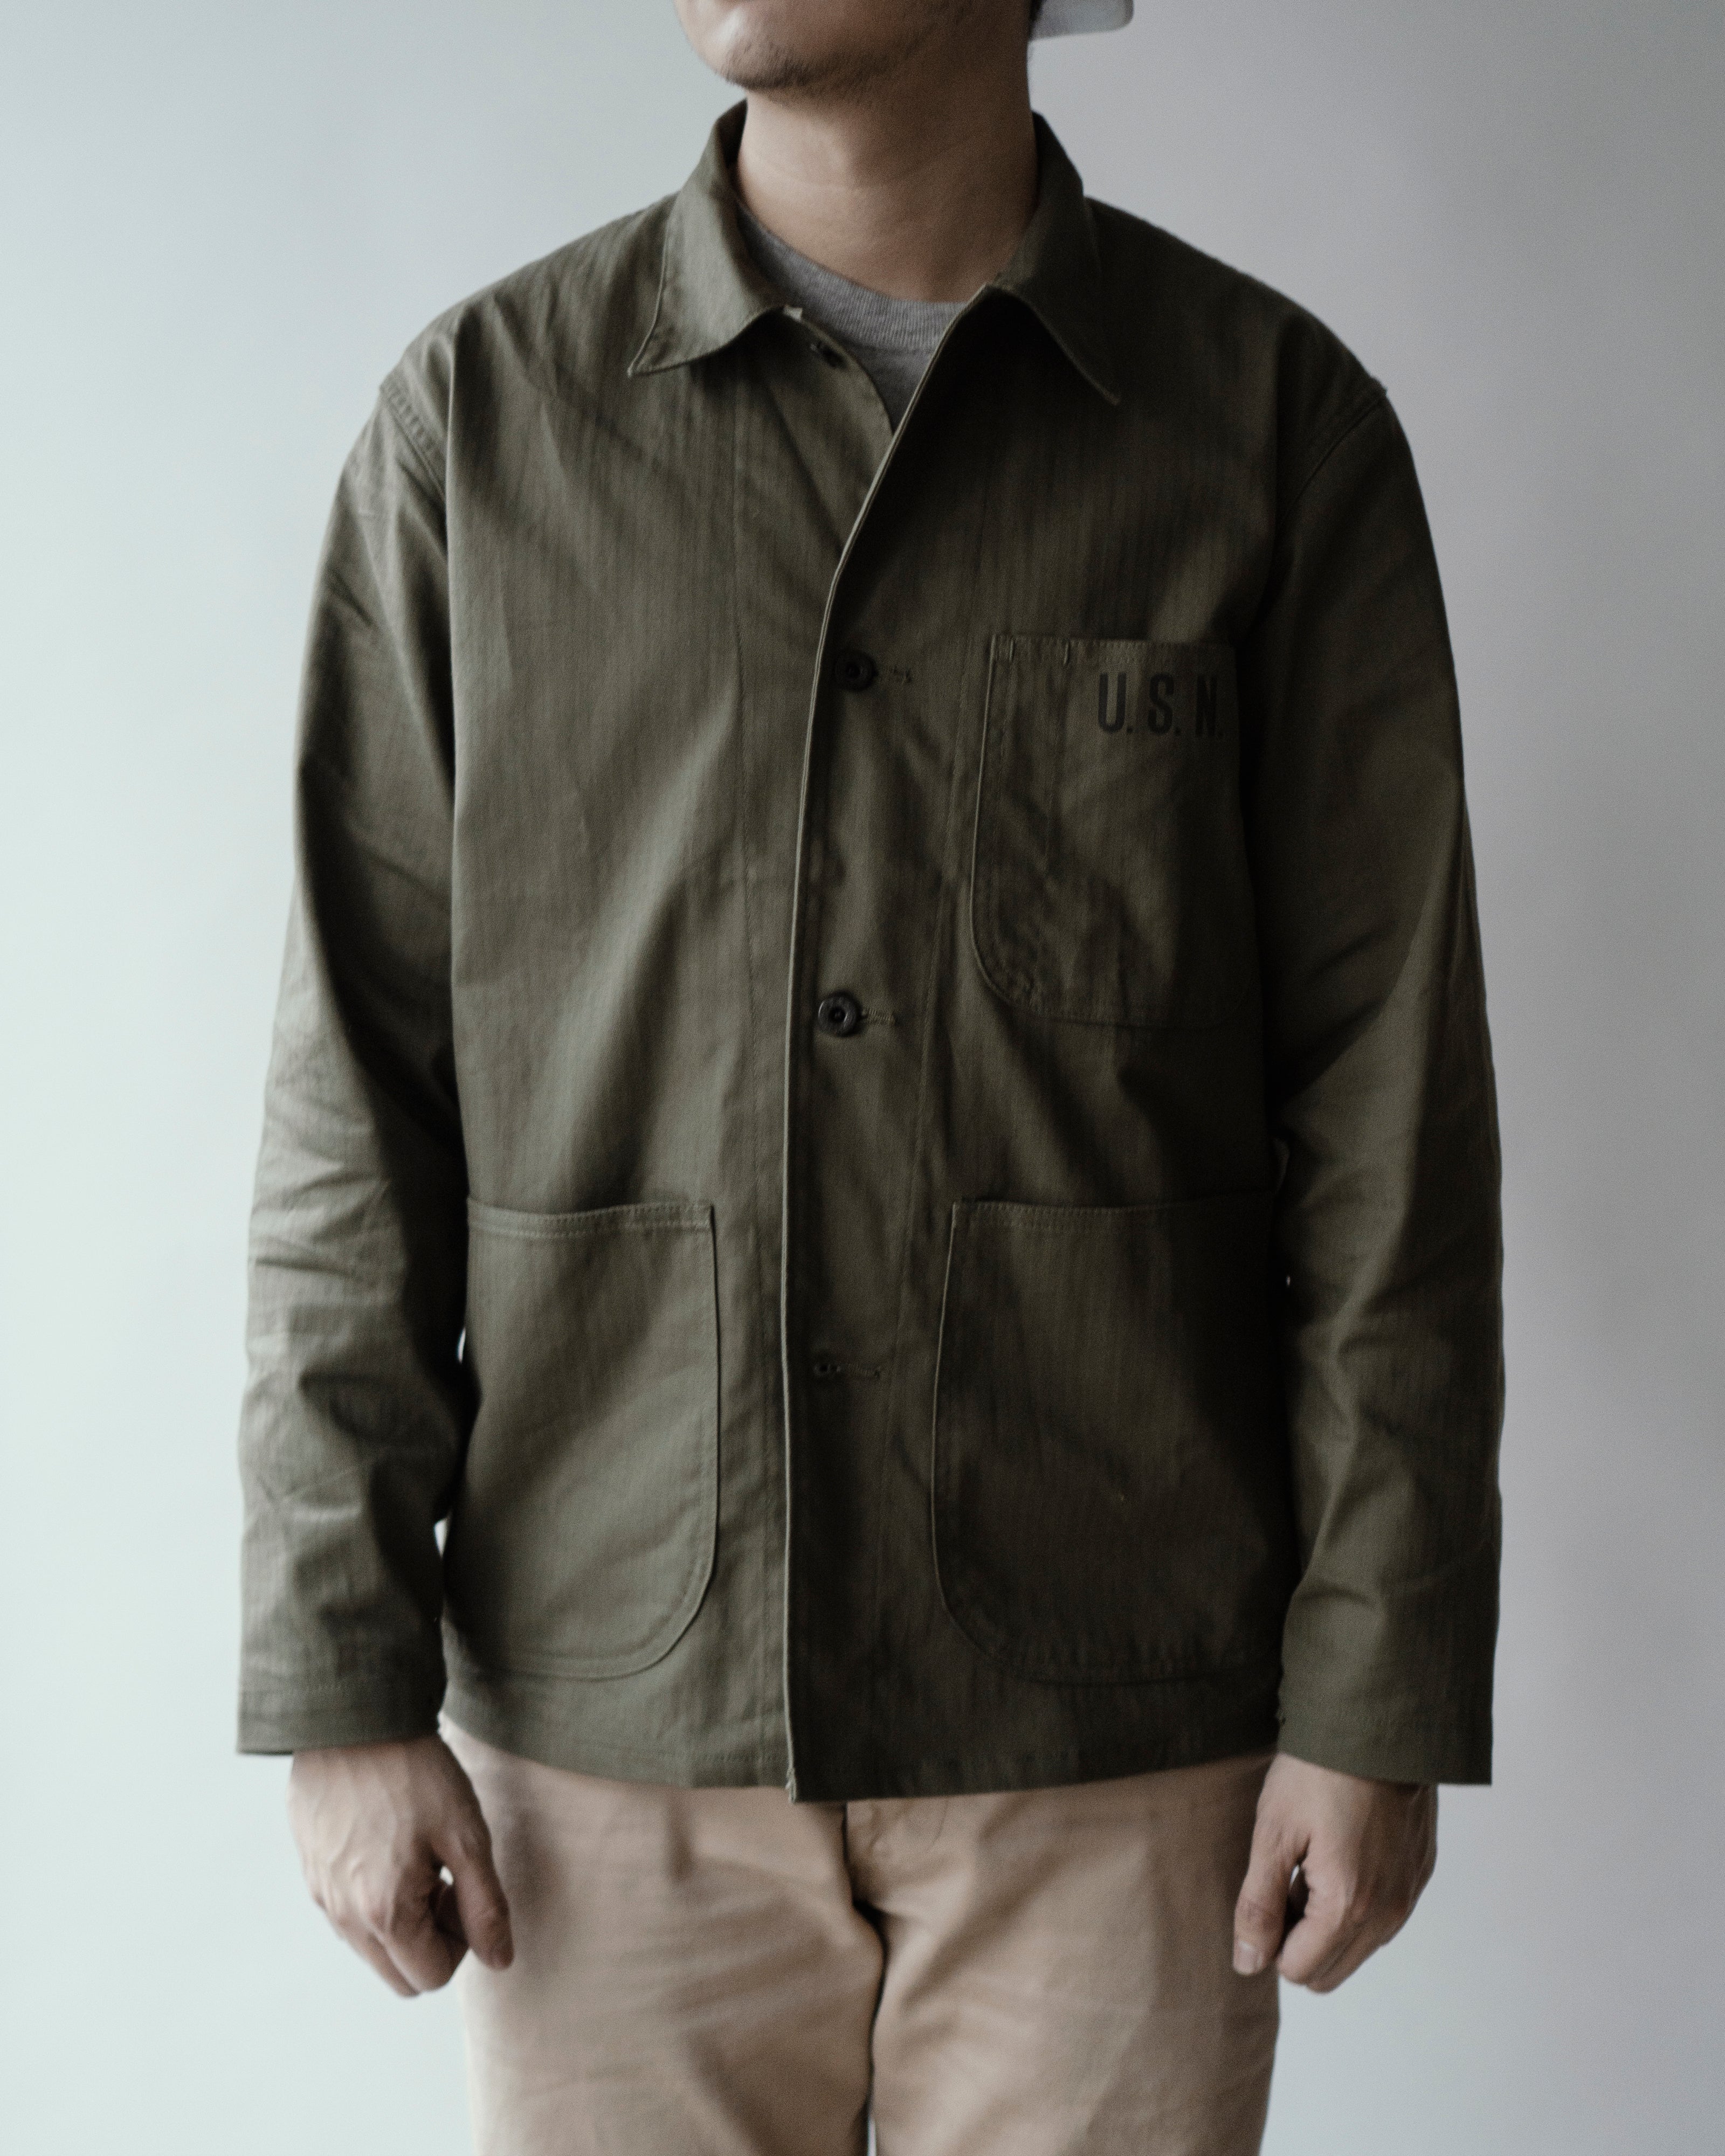 The Real McCoy's N-3 Utility Jacket | The Signet Store